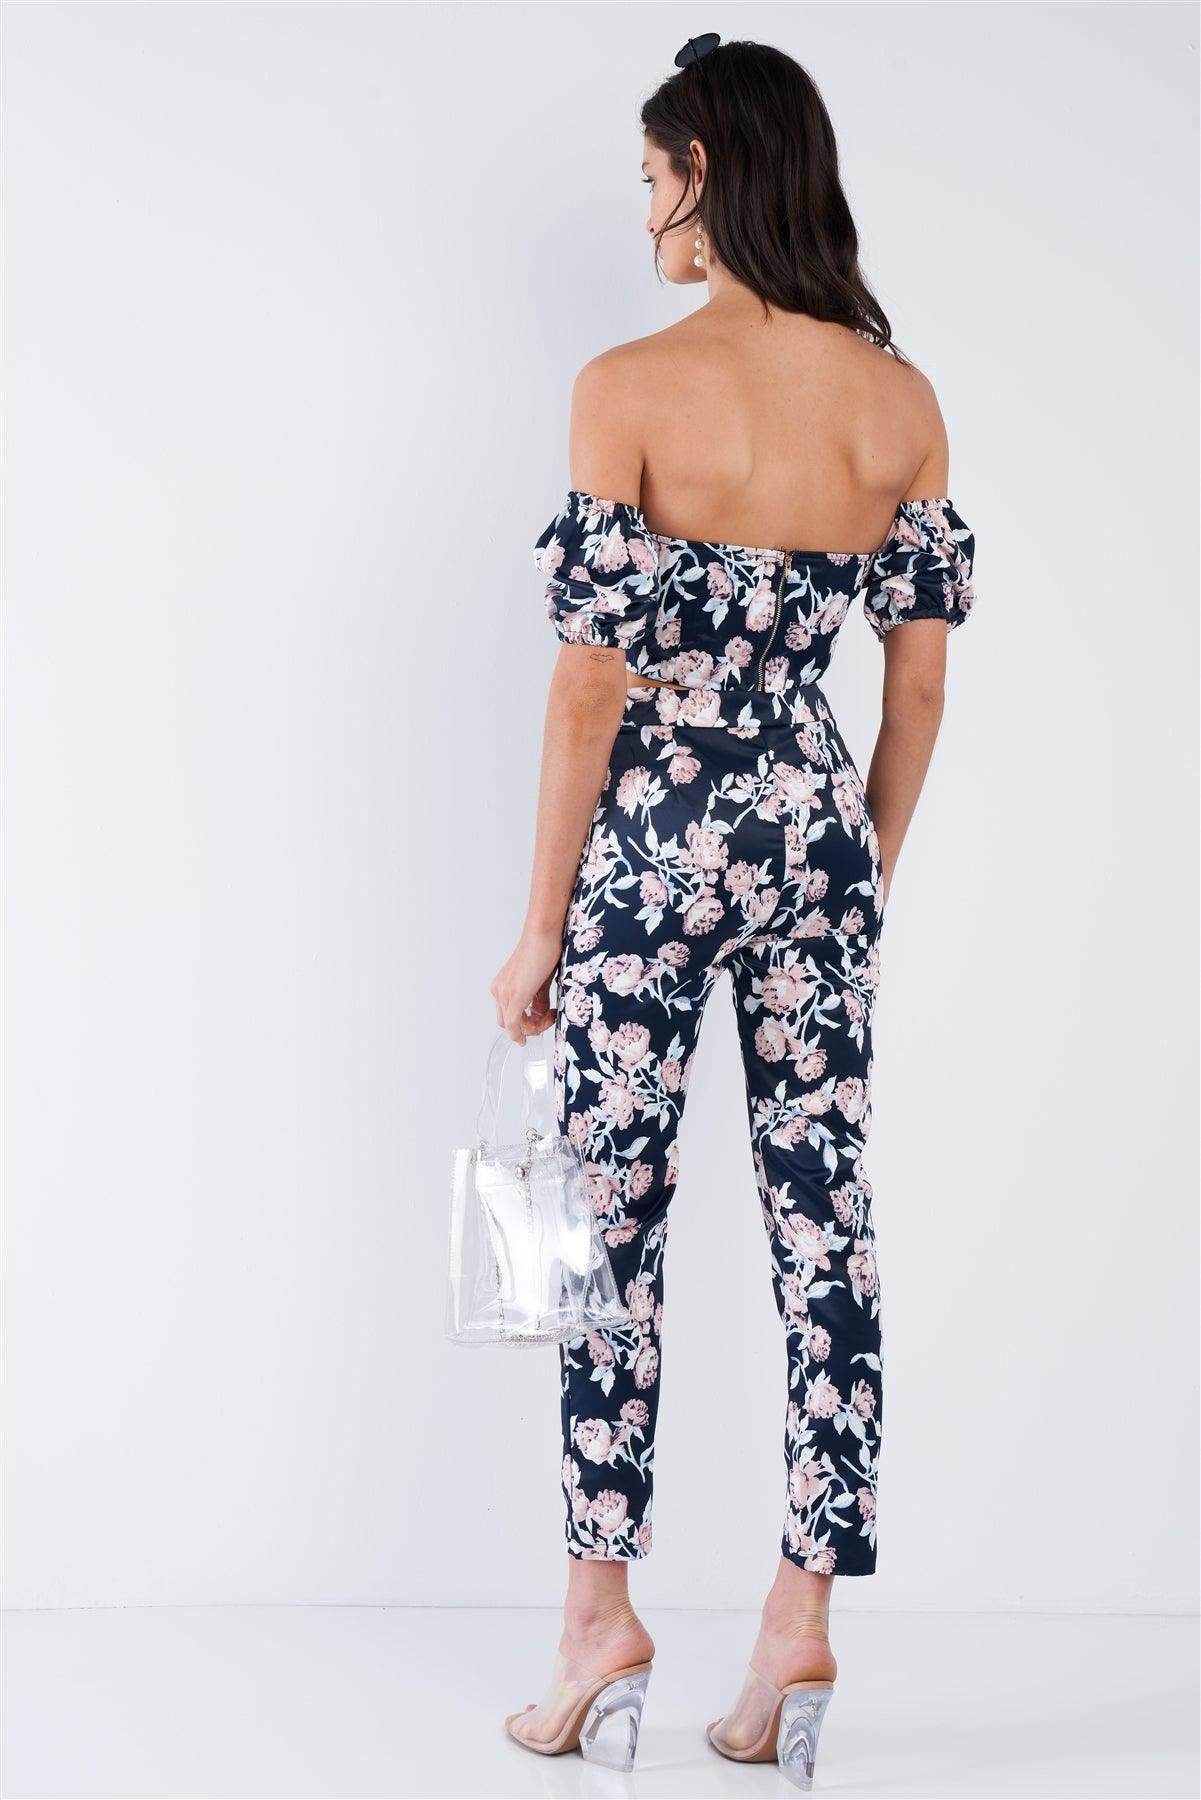 Ensign Blue Mixed Floral Off The Shoulder Lace Up Crop Top & High Waist Ankle Length Pant Set